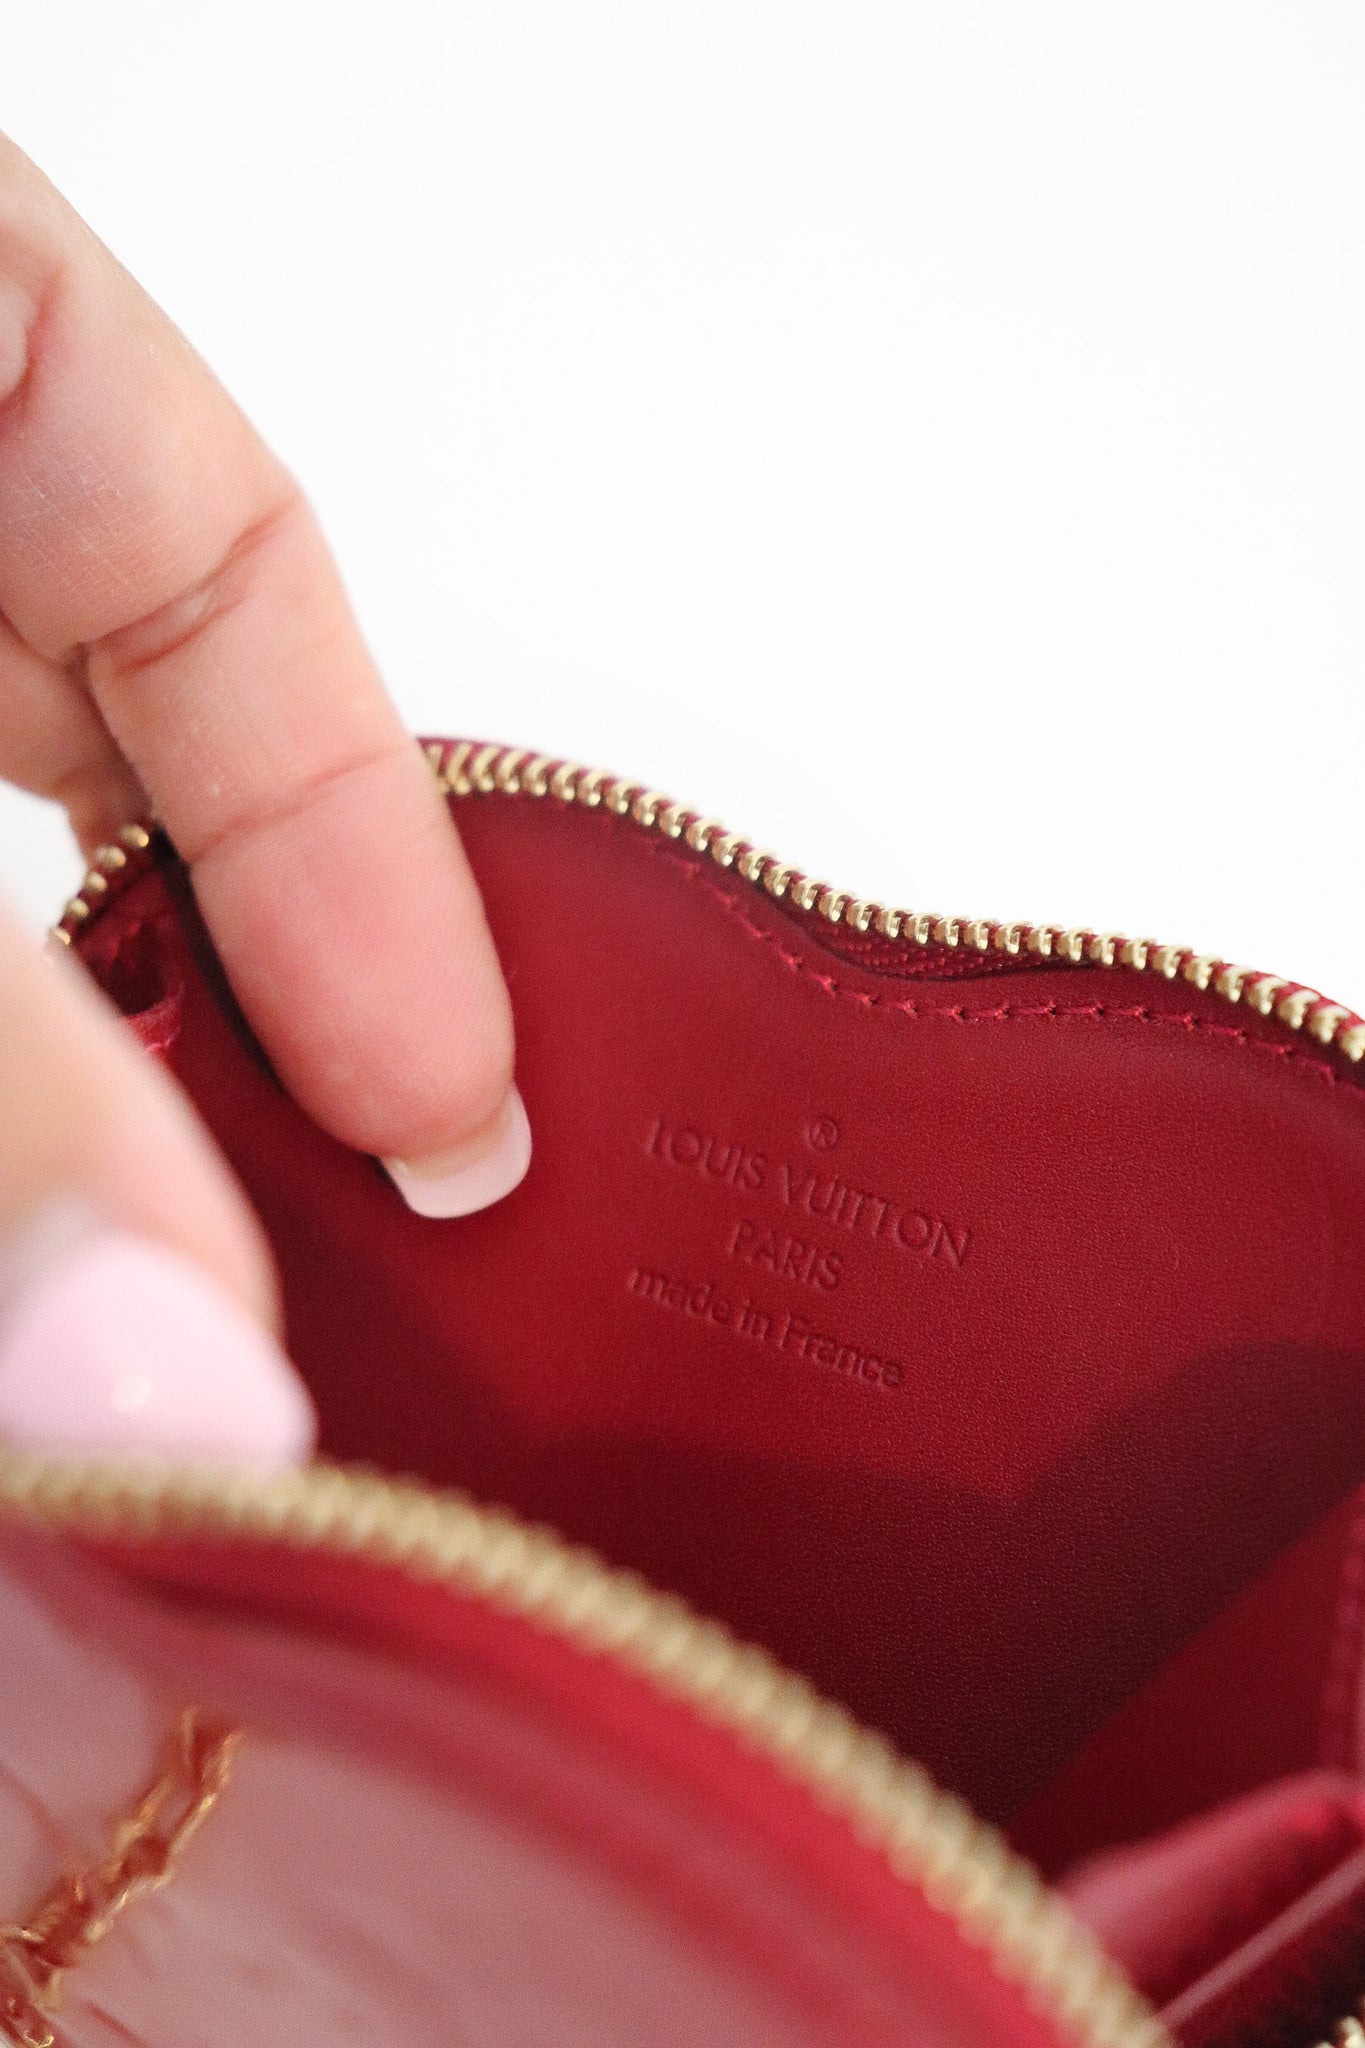 Louis Vuitton Red Monogram Vernis Patent Leather Coin Purse. , Lot  #75021